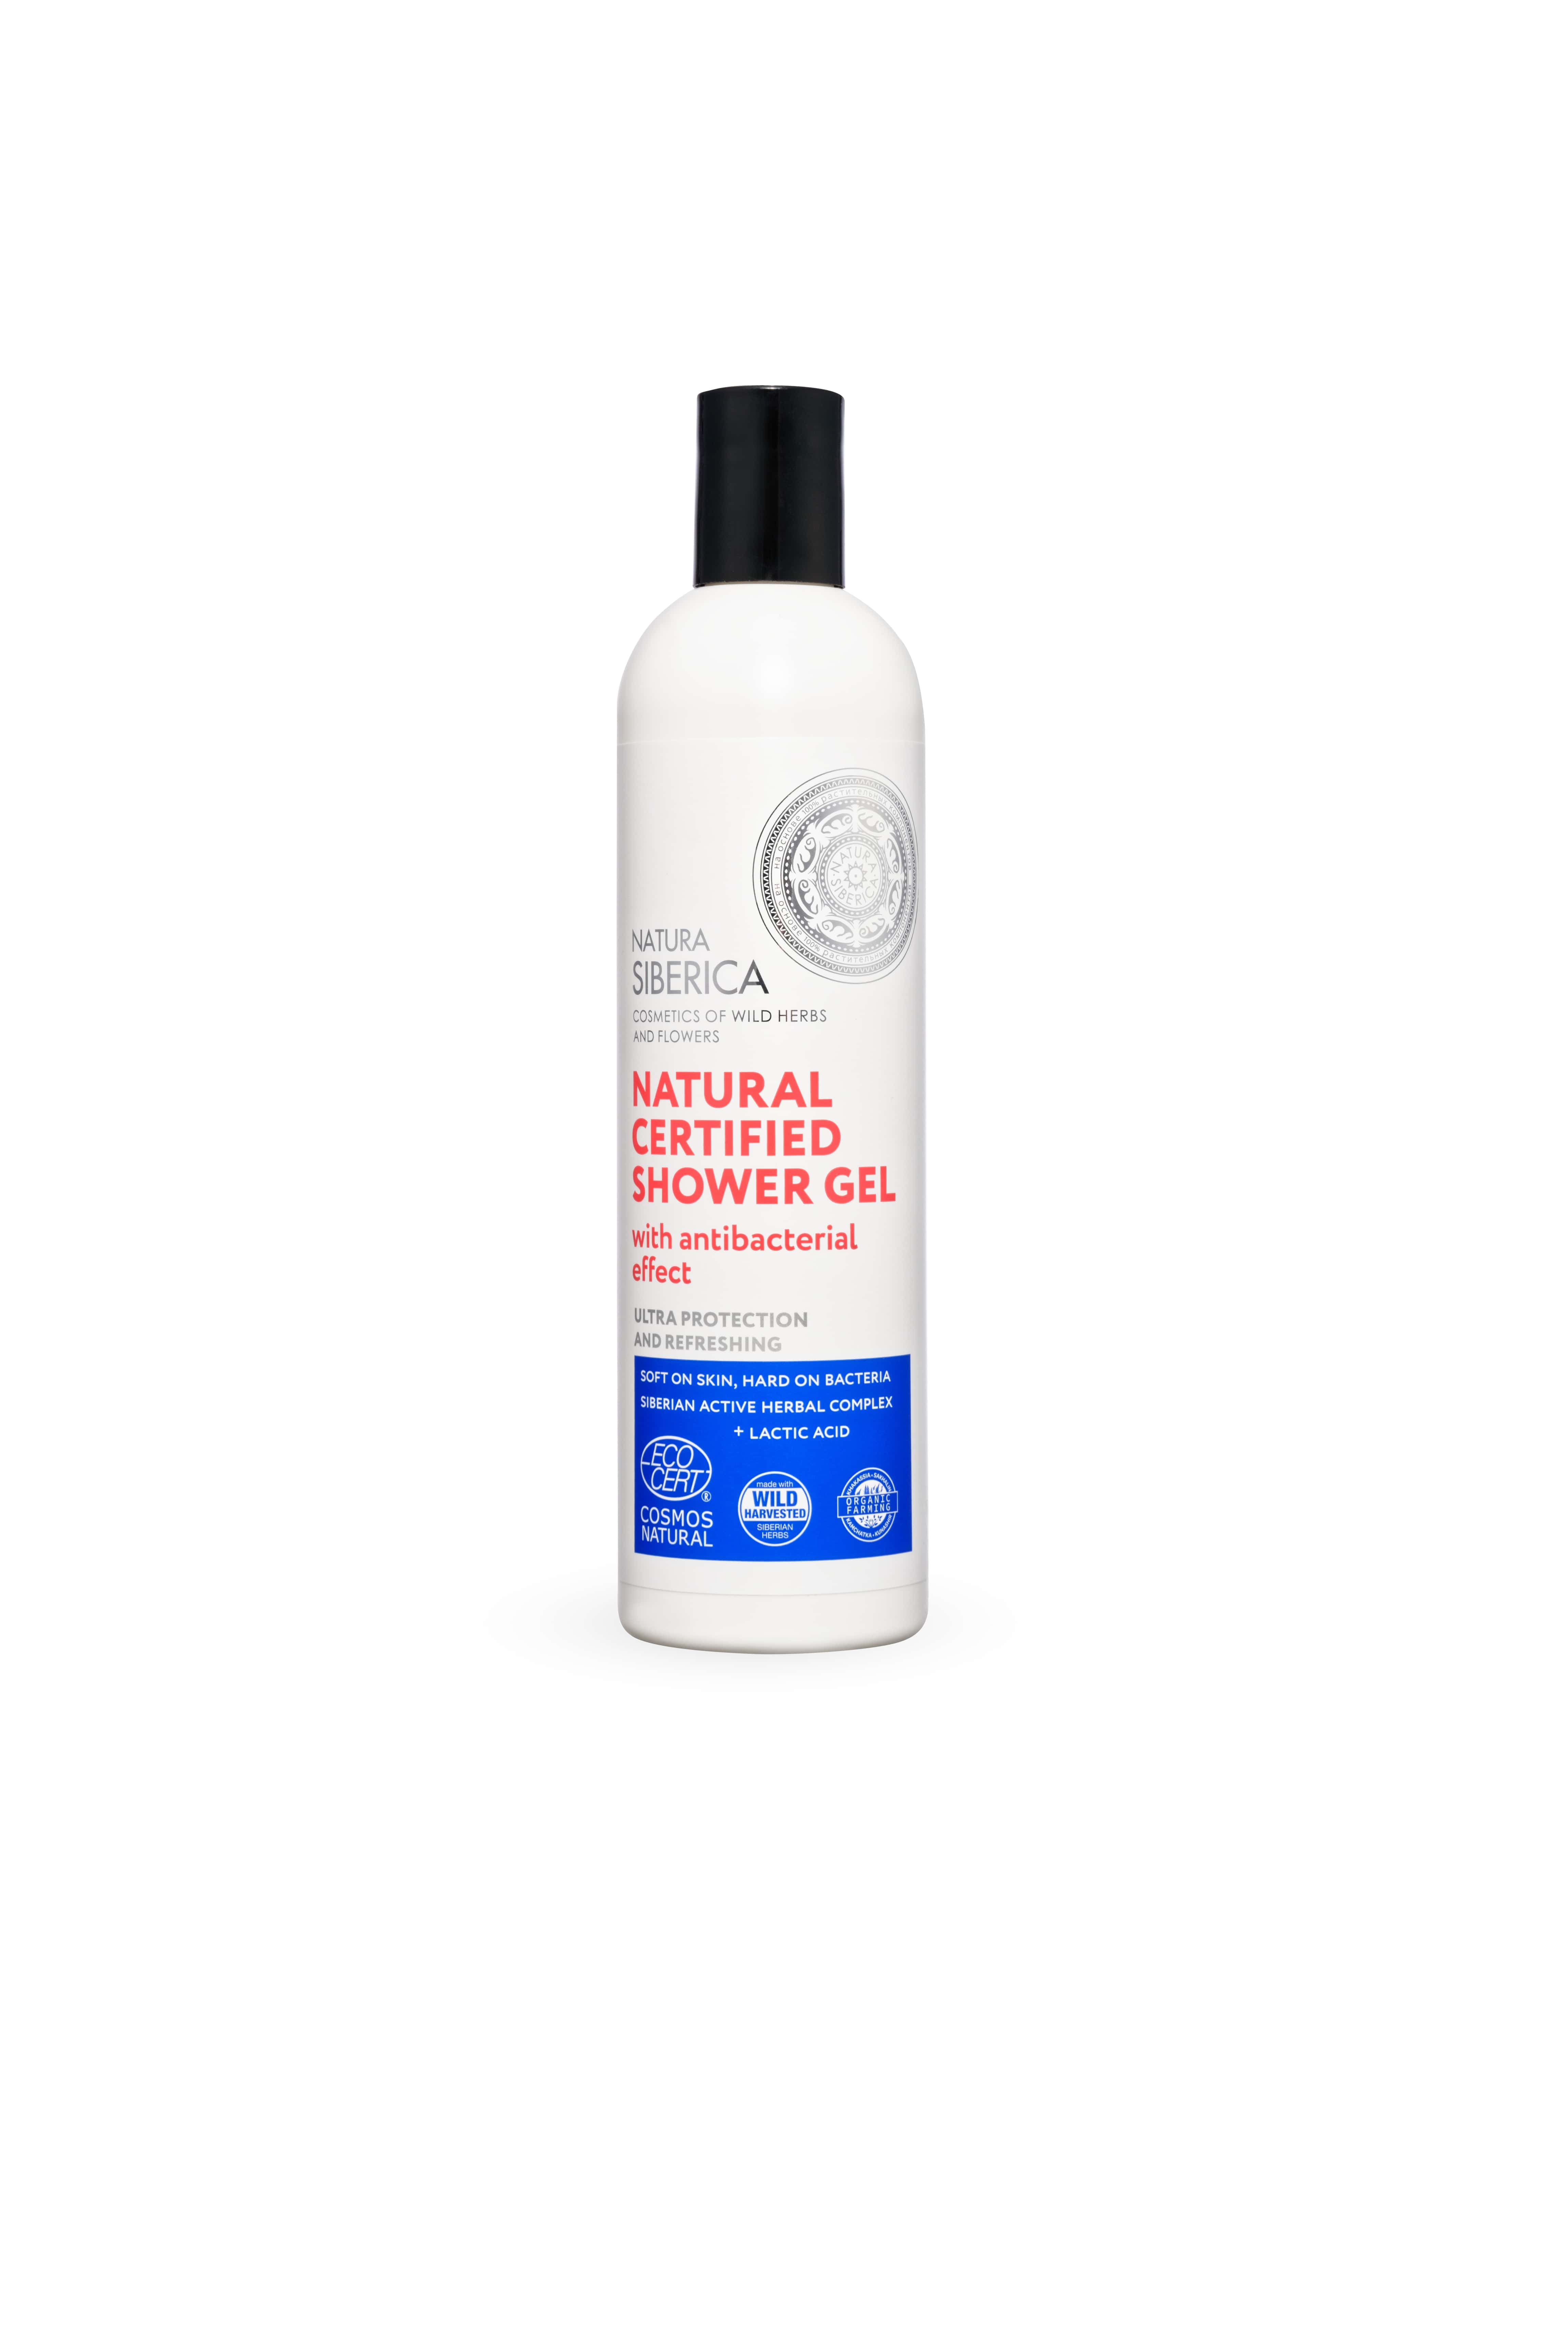 Natural Certified Shower Gel with antibacterial effect